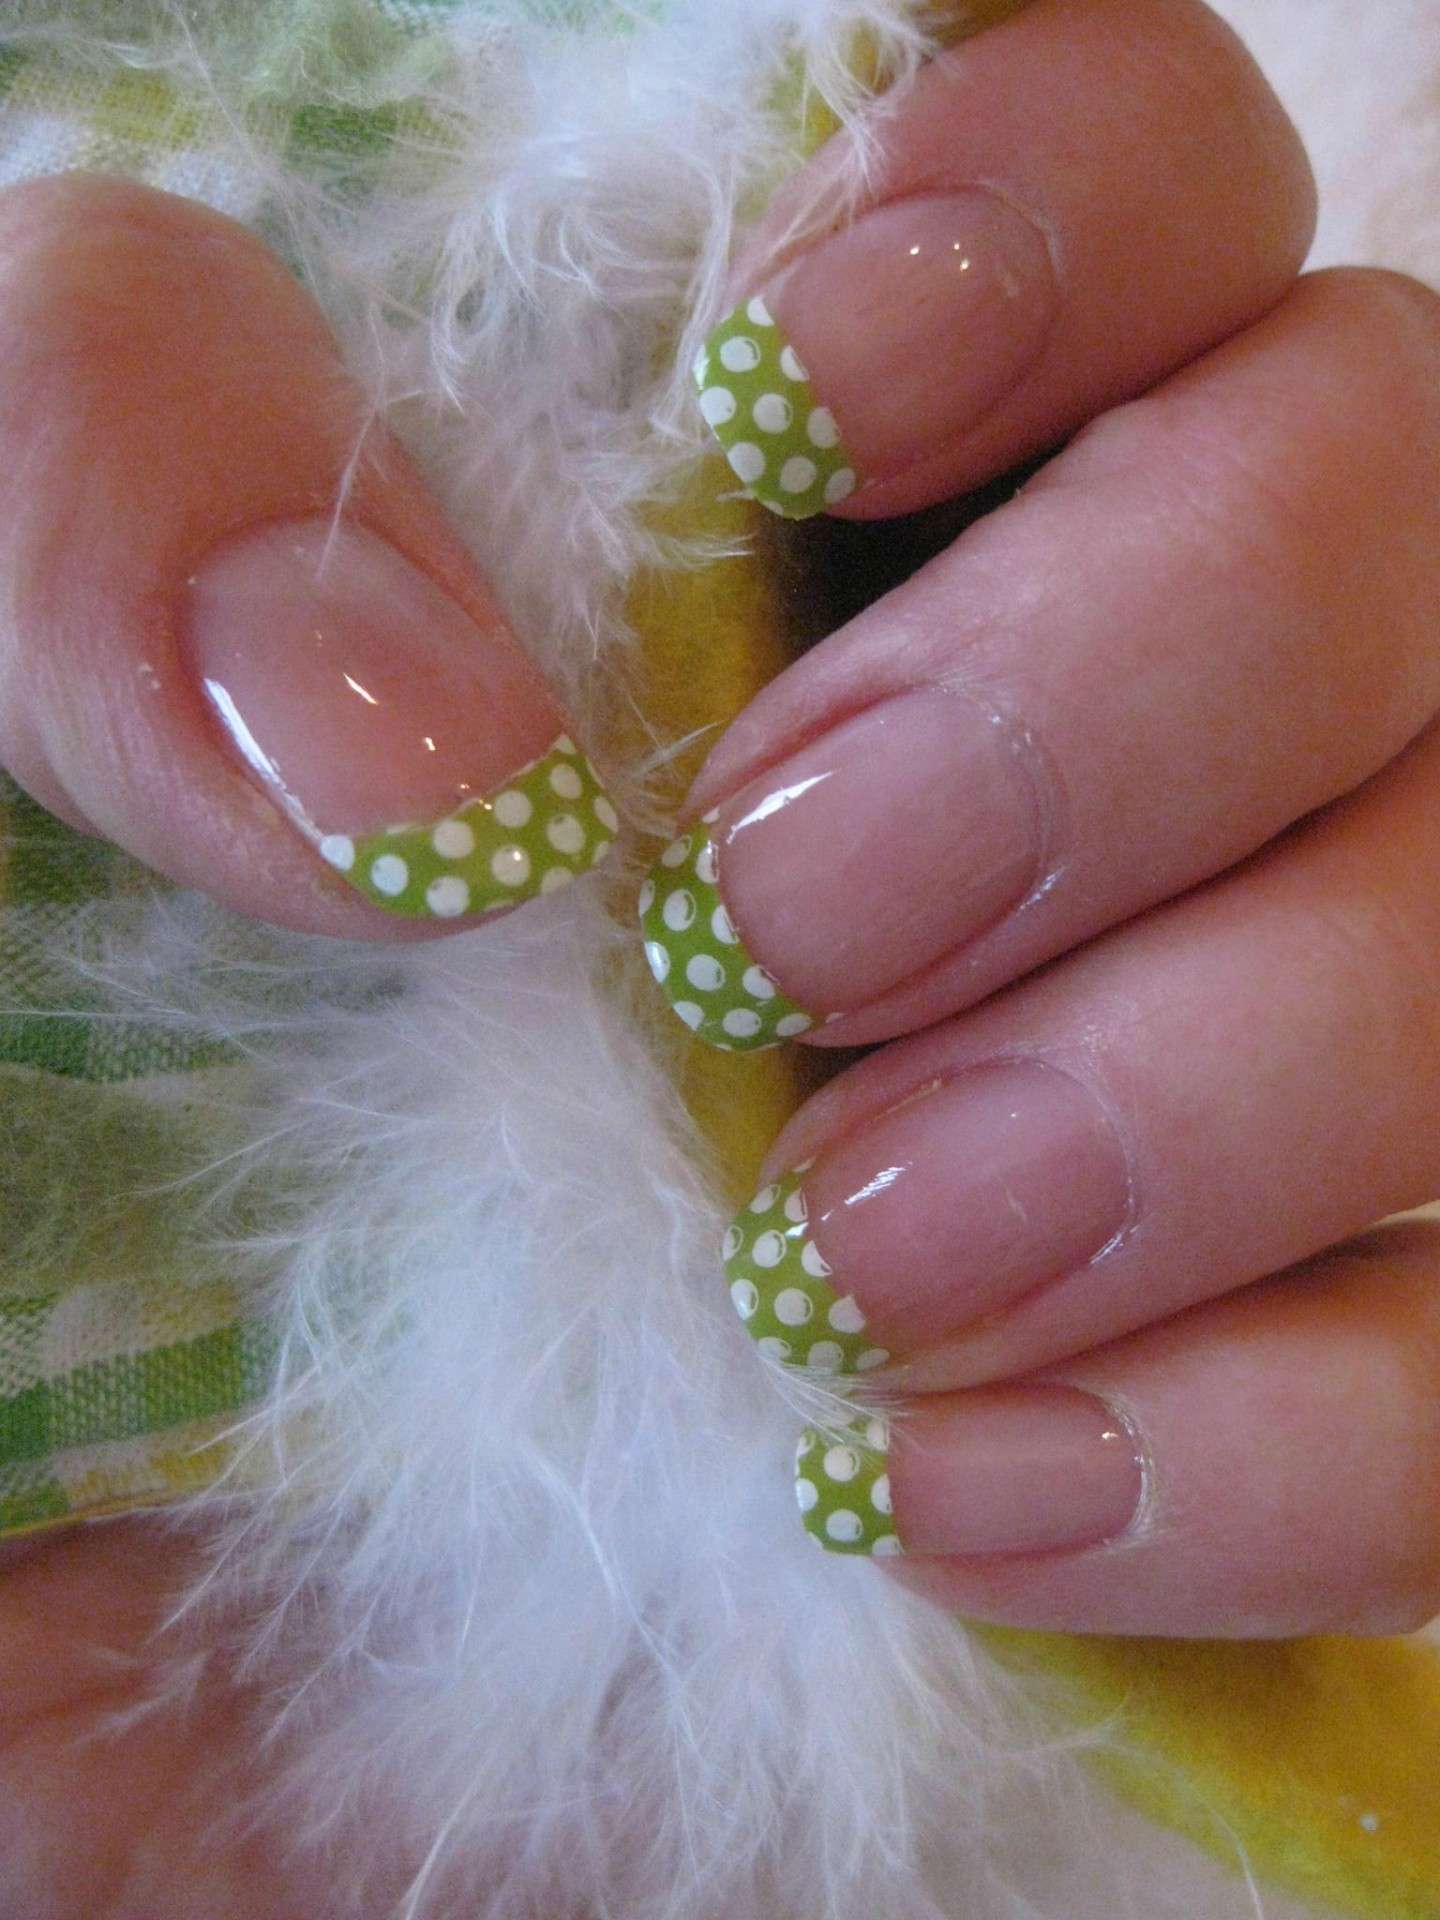 French manicure verde con pois bianchi